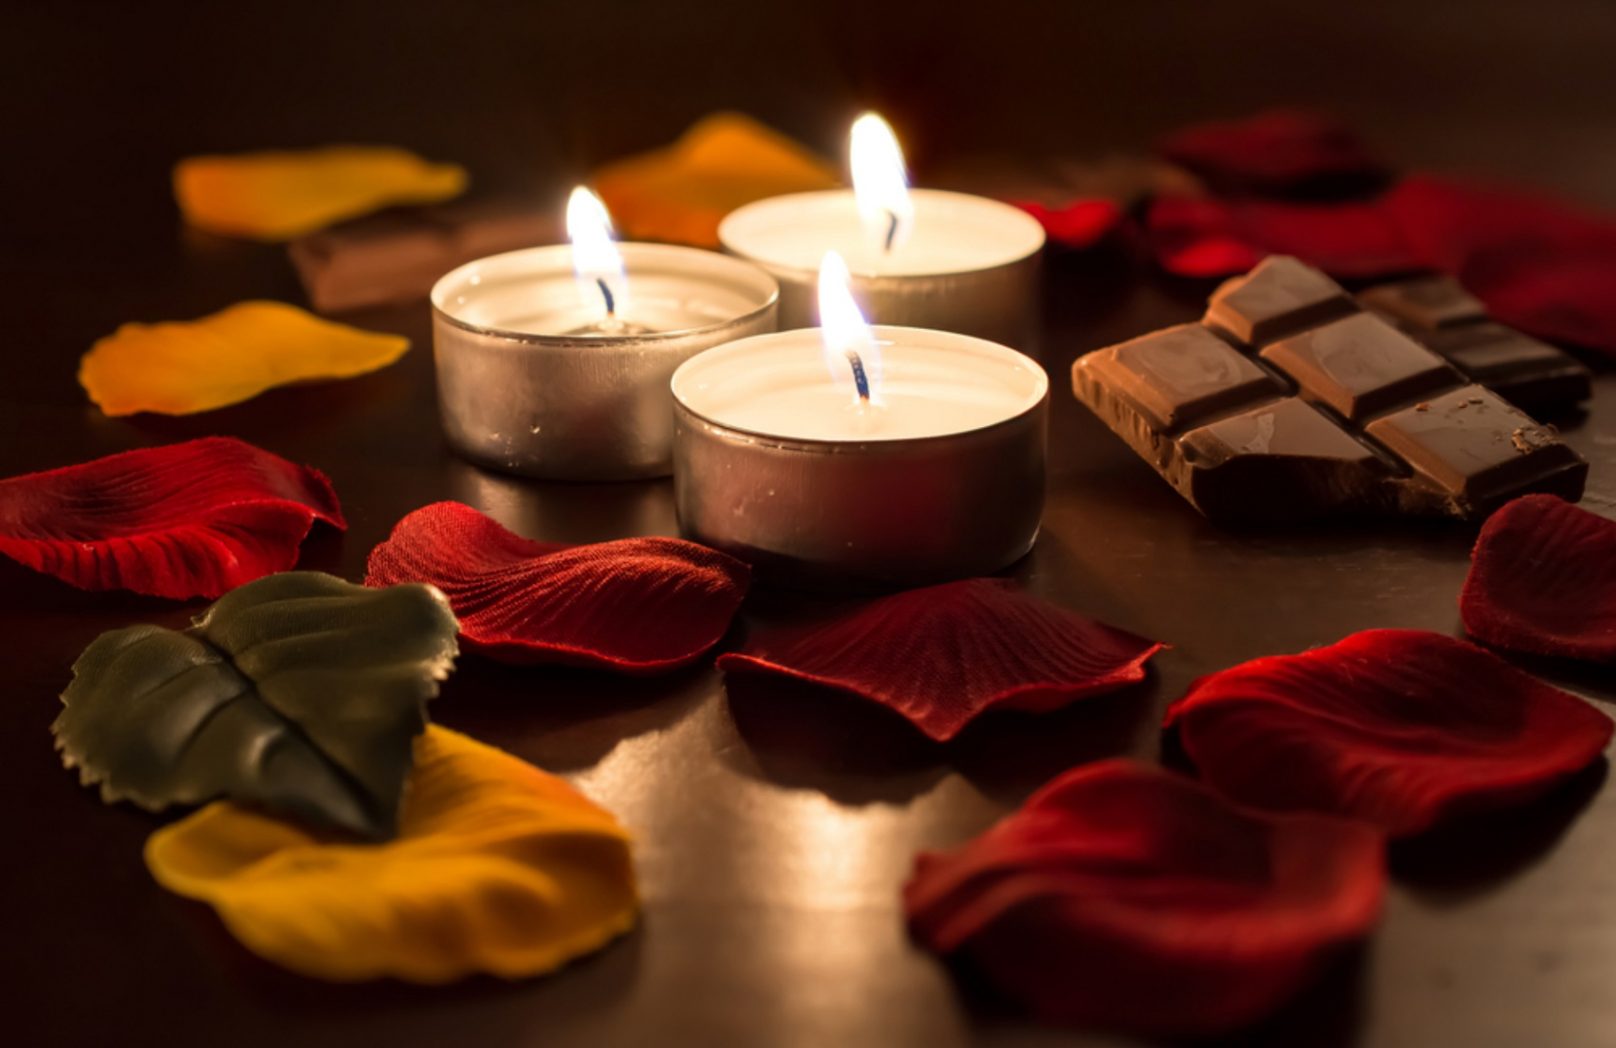 Spa candles with chocolate and rose petals